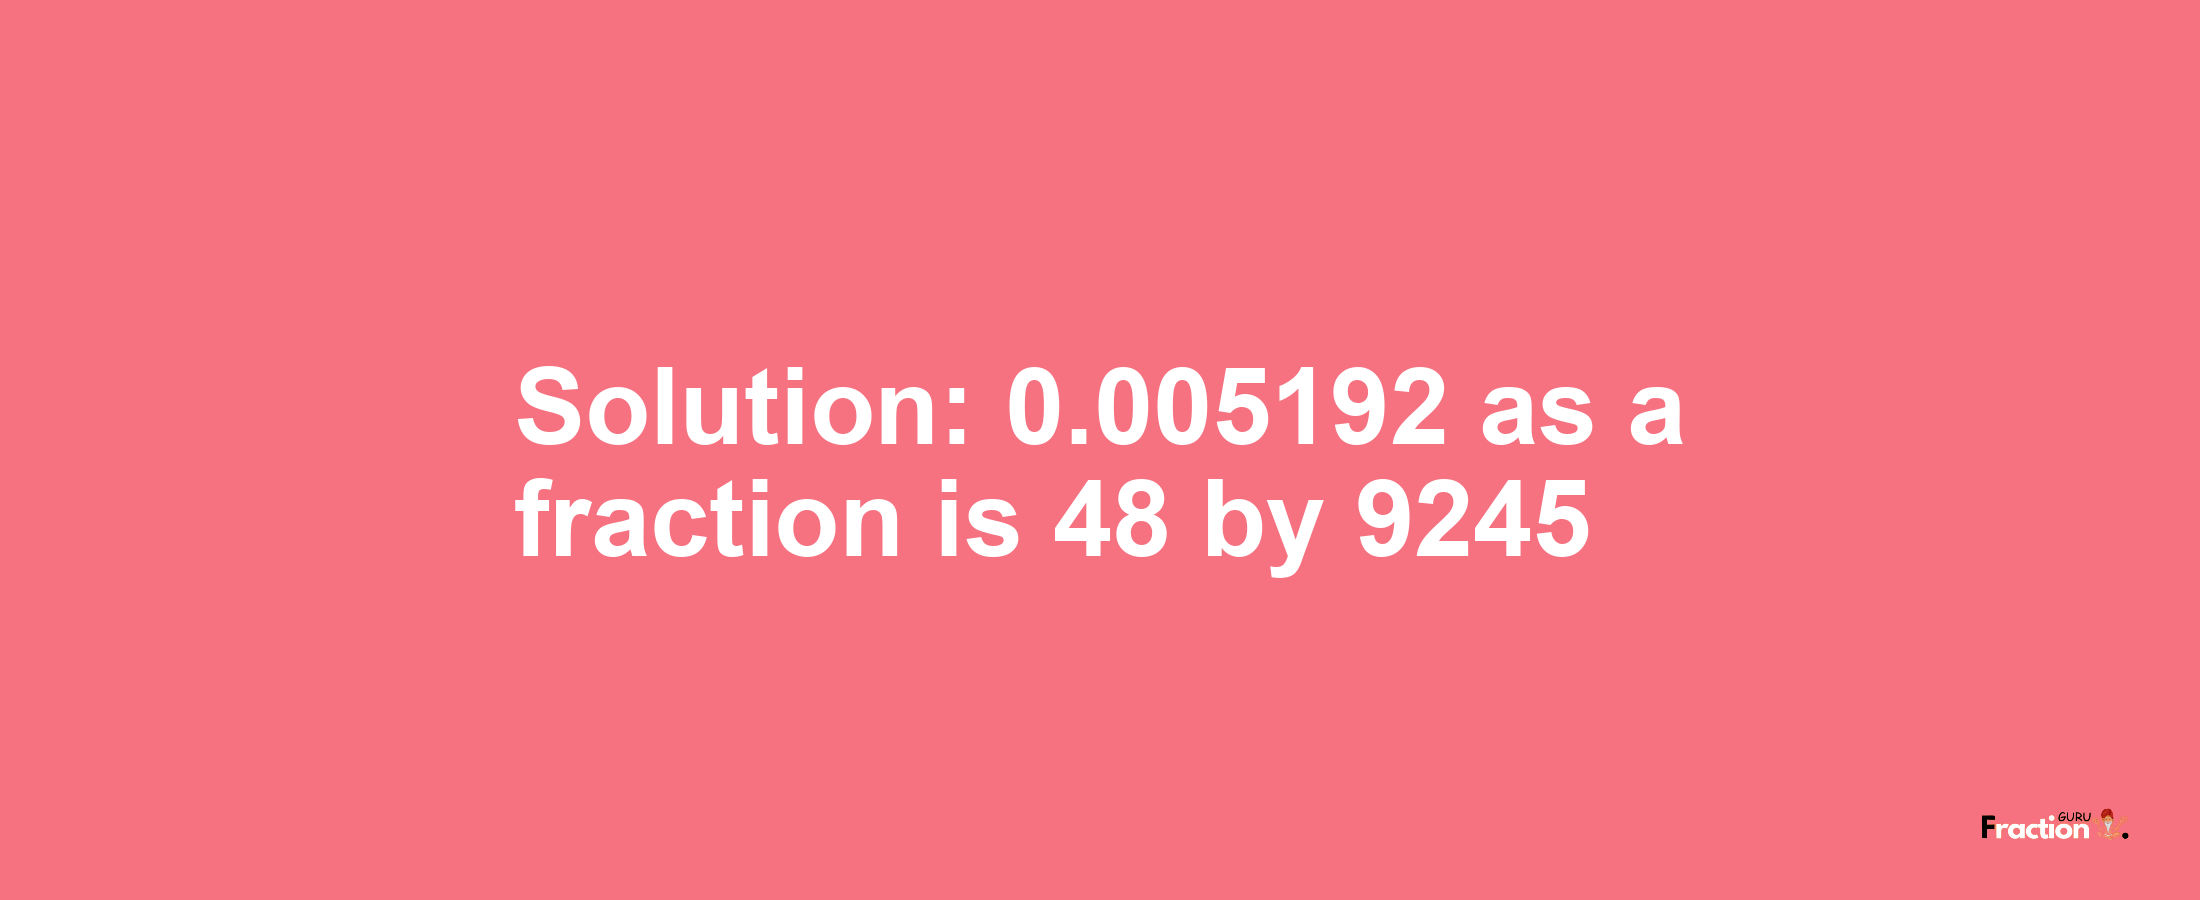 Solution:0.005192 as a fraction is 48/9245